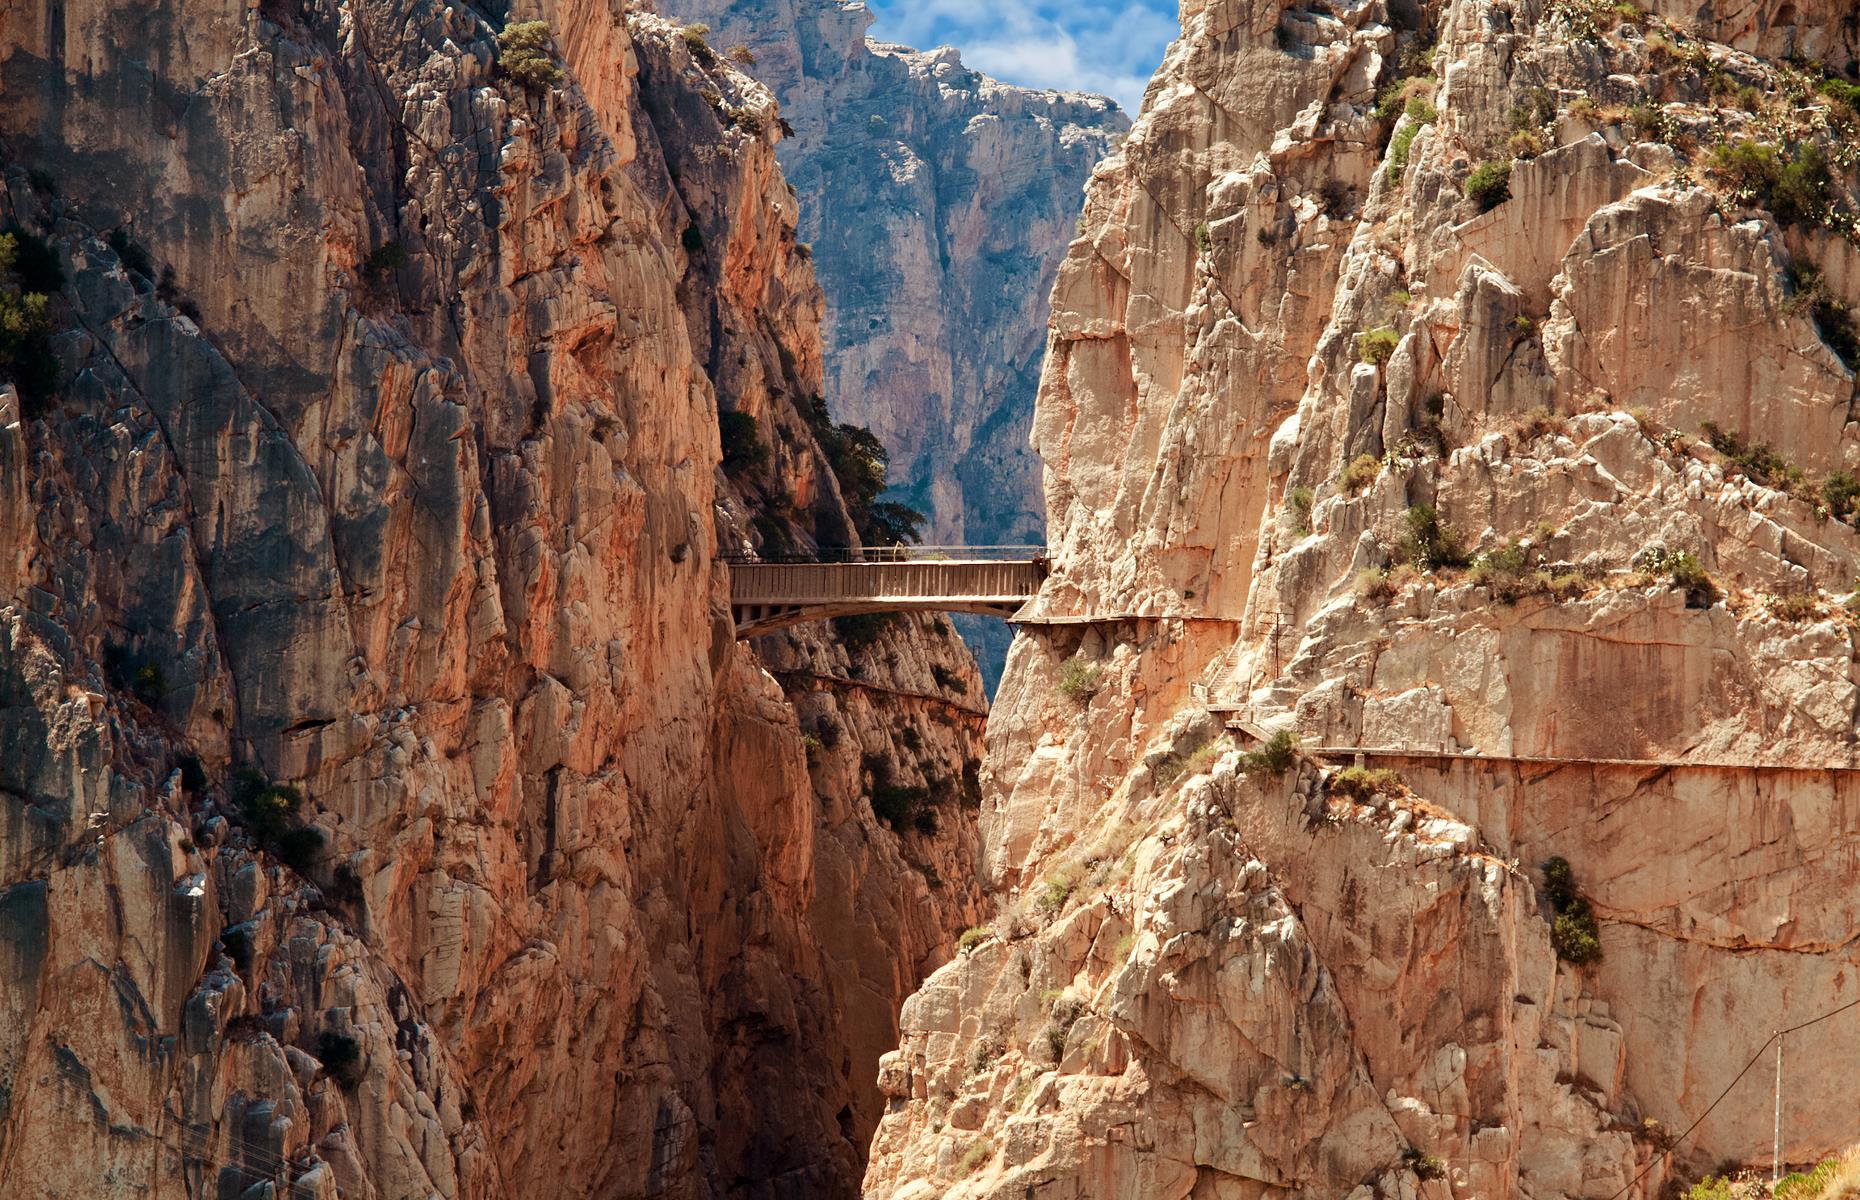 <p>El Caminito del Rey (the King’s Little Path) is a vertiginous walkway that clings to the cliffs above El Chorro gorge in the province of Malaga. Construction on the trail, made up of concrete boardwalks pinned to the cliffs, began in 1901 so workers at El Chorro's hydroelectric power station had access to the El Gaitanejo dam. As well as the narrow cliff-edge walkway, a suspension footbridge was strung across the gorge, soaring over 328 feet (100m) above the Guadalhorce River. </p>